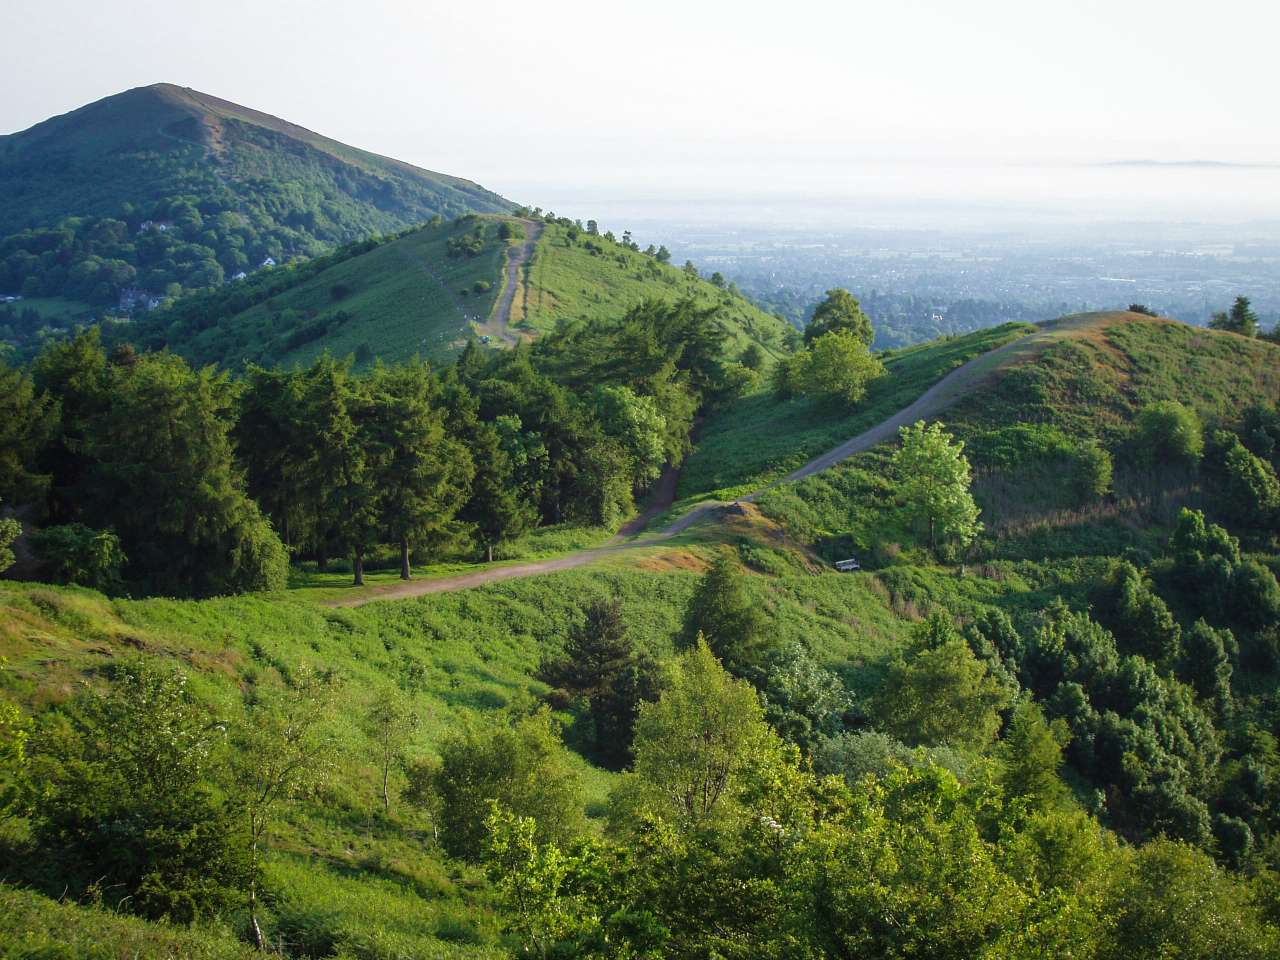 The Malvern Hills in the United Kingdom, claimed by Alfred Watkins to have a ley line passing along their ridge. © Image Credit: Wikimedia Commons